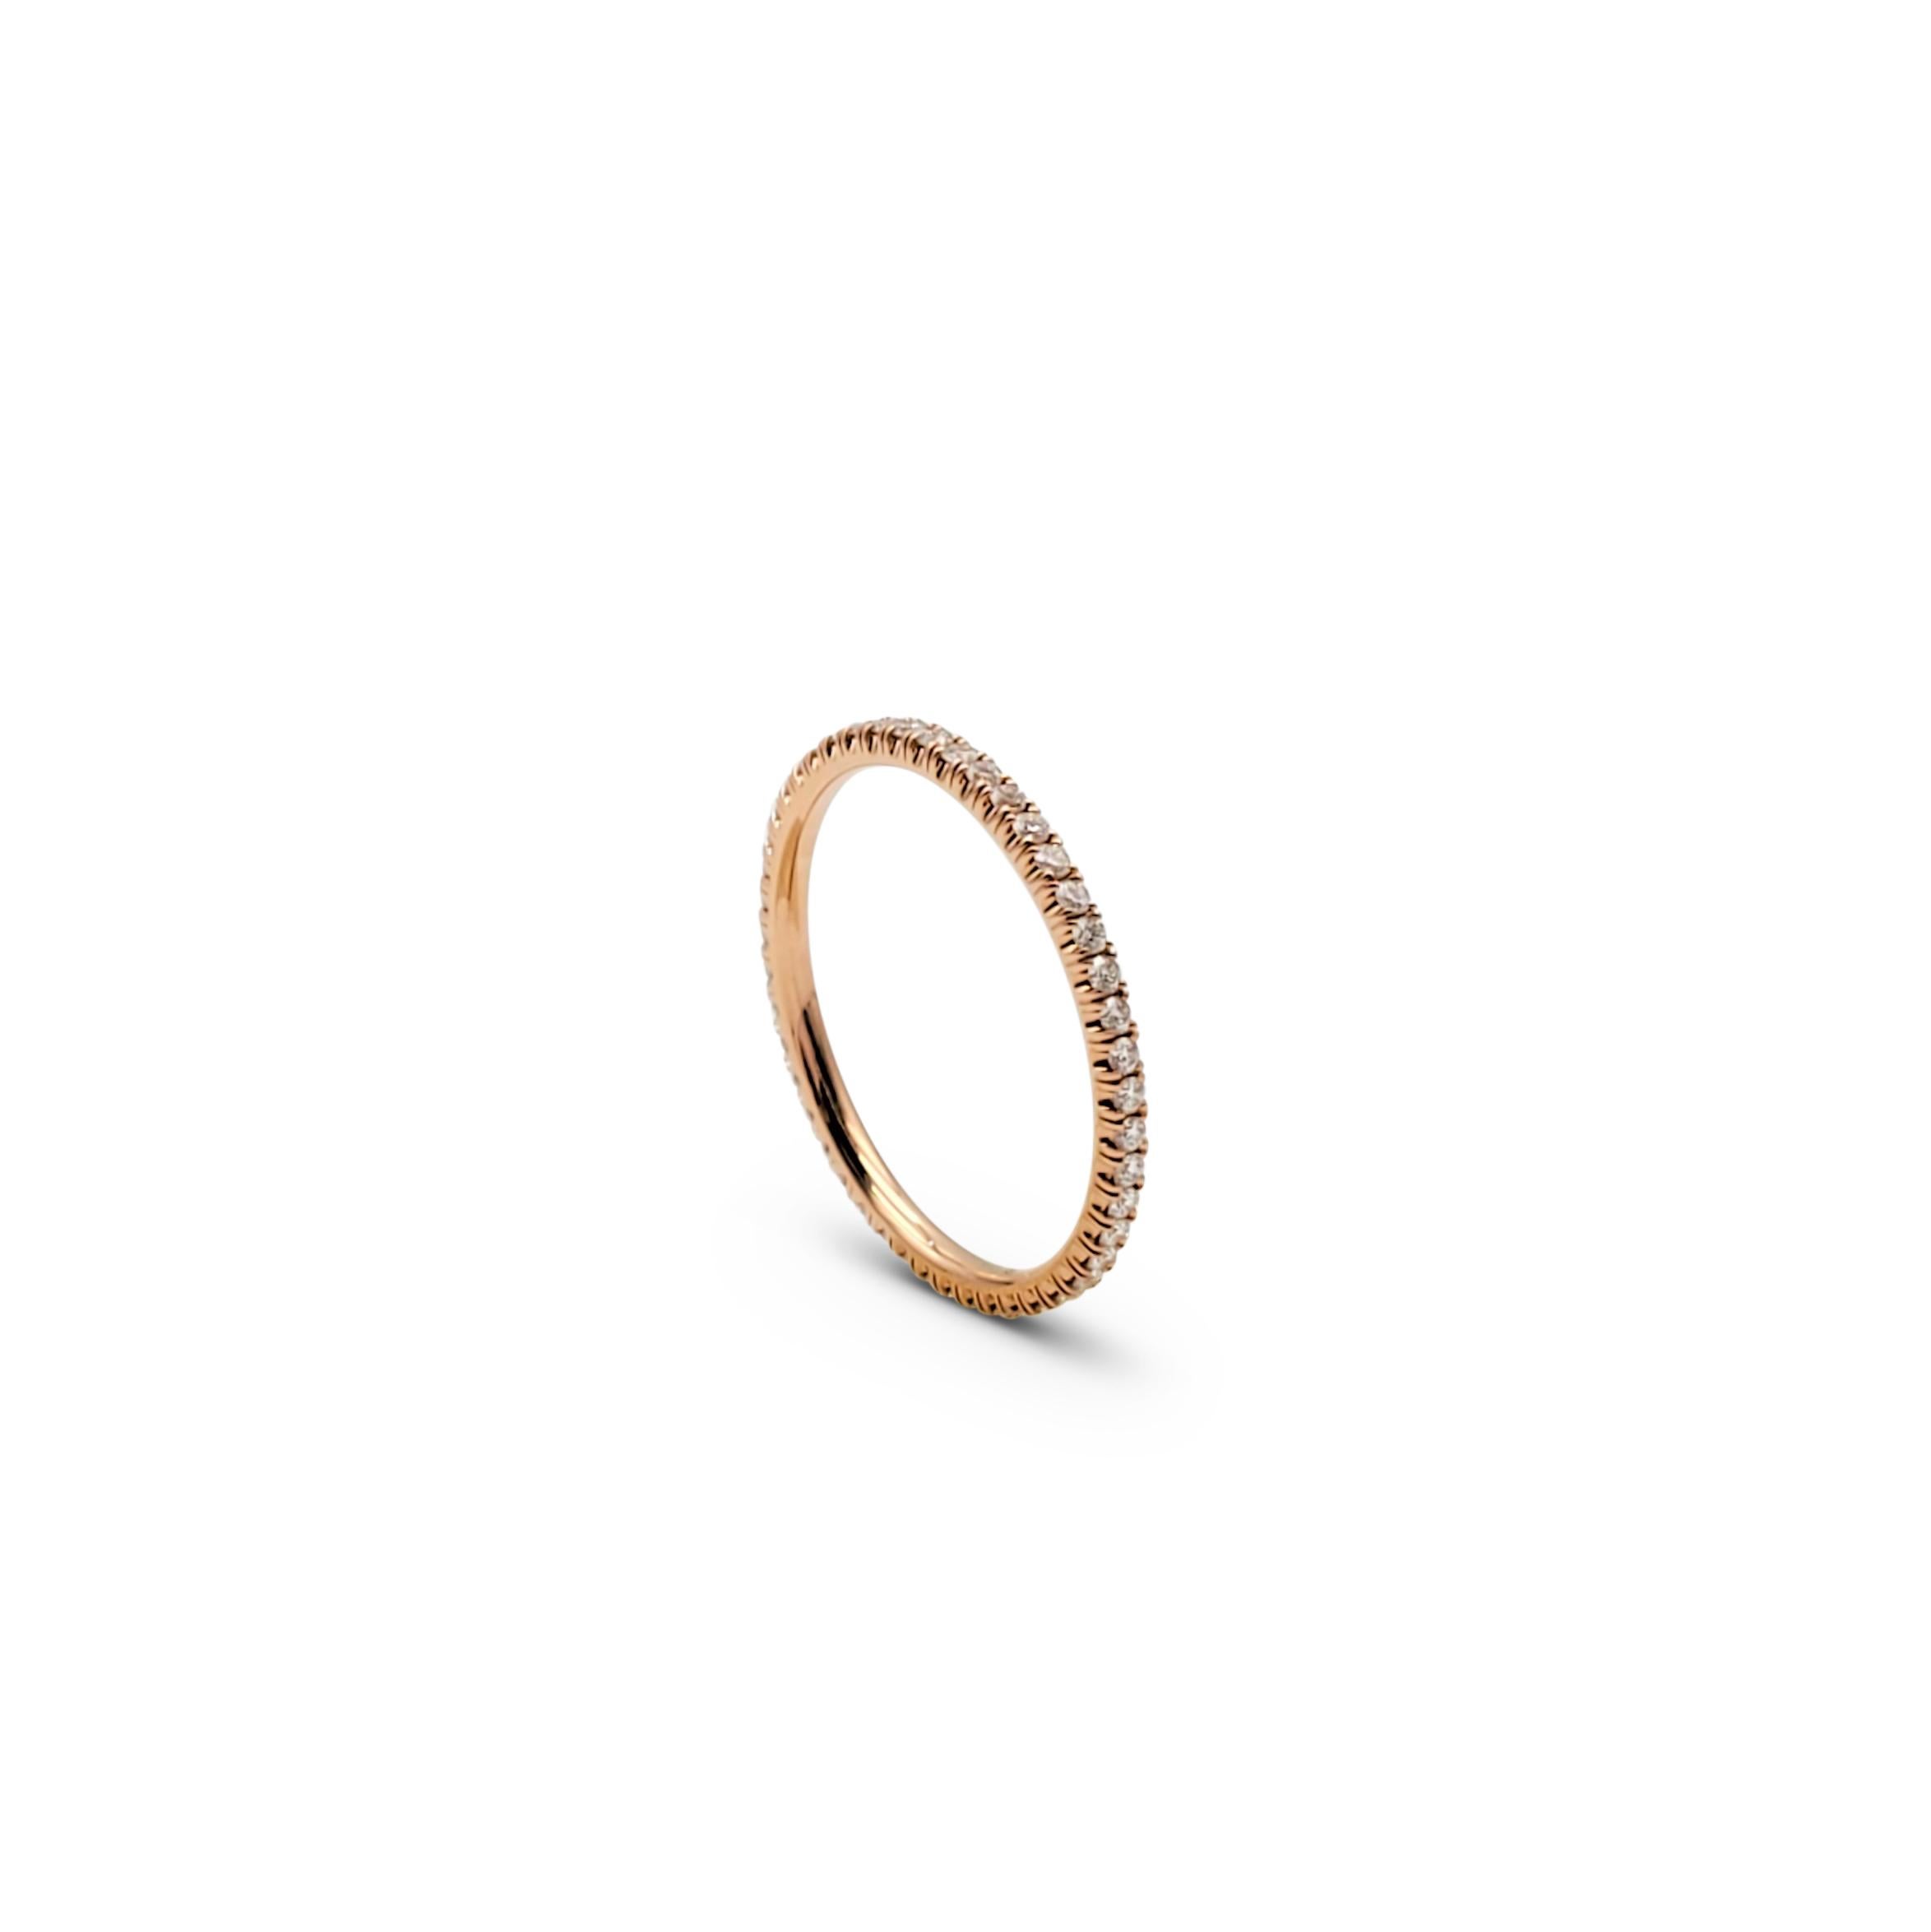 Authentic Cartier 'Étincelle de Cartier' wedding band crafted in 18 karat rose gold, set with round brilliant cut diamonds (E-F, VS) totaling 0.22 carats. Signed Cartier, 50, Au750, with serial number. Ring size 50 (US 5 1/4). The ring is presented